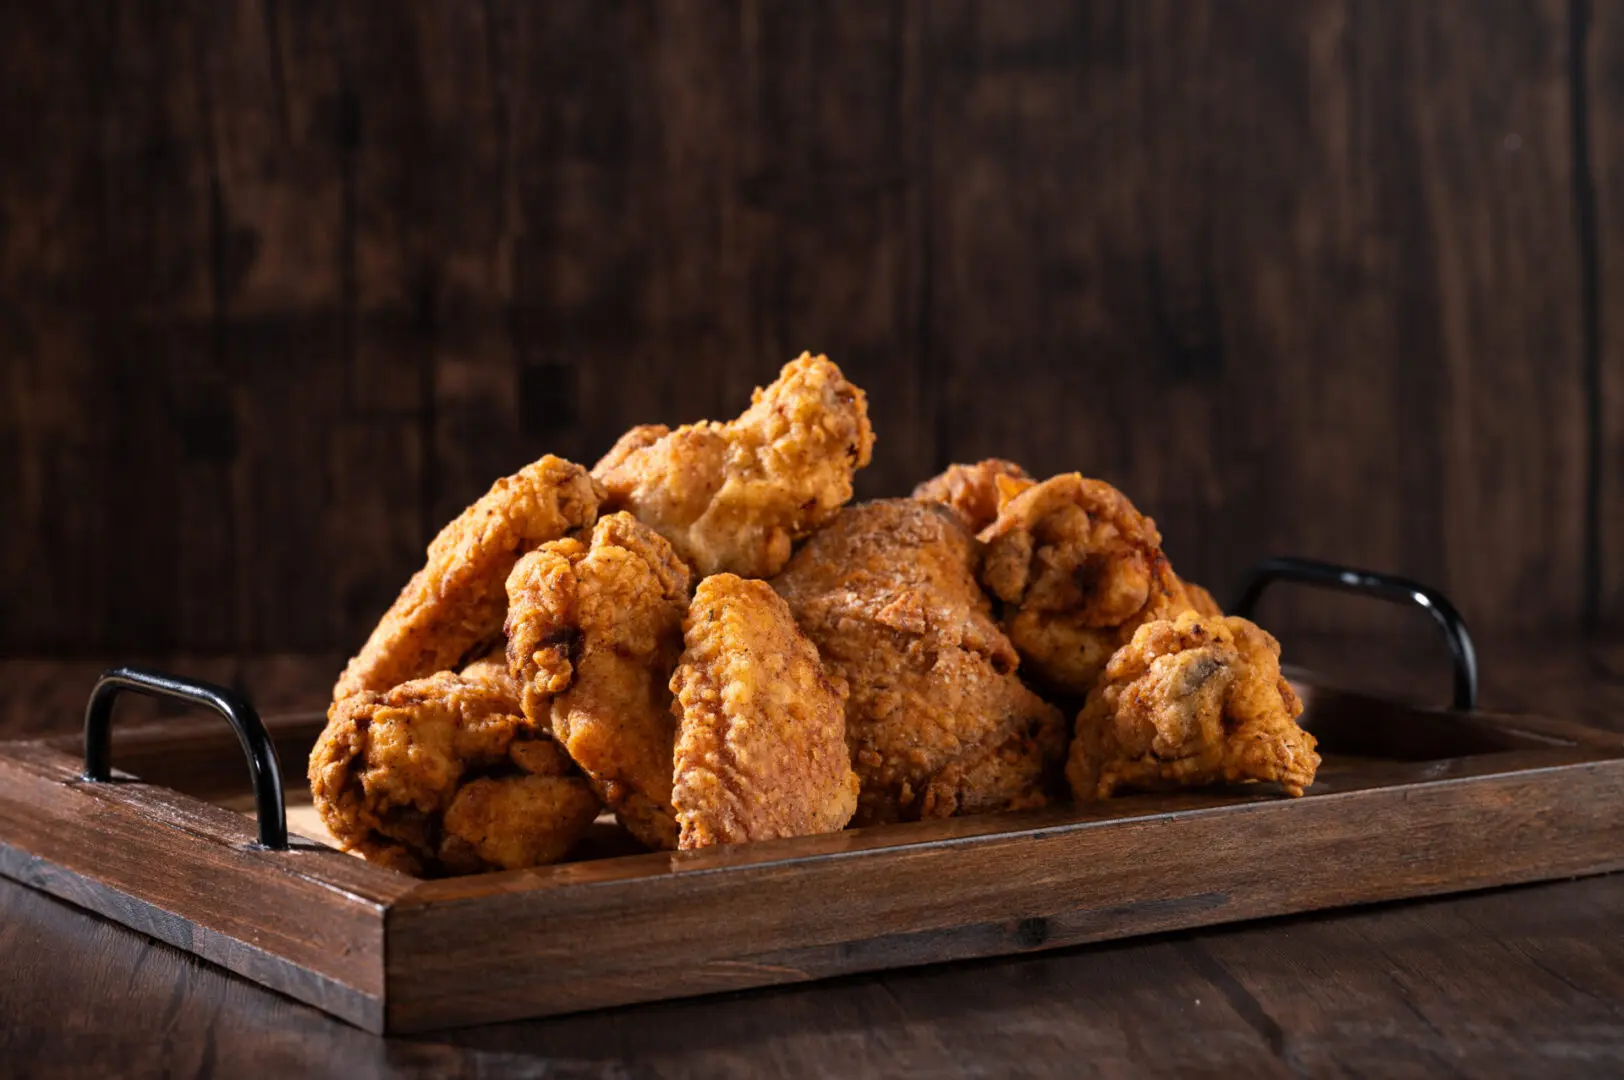 A wooden tray filled with lots of fried chicken.